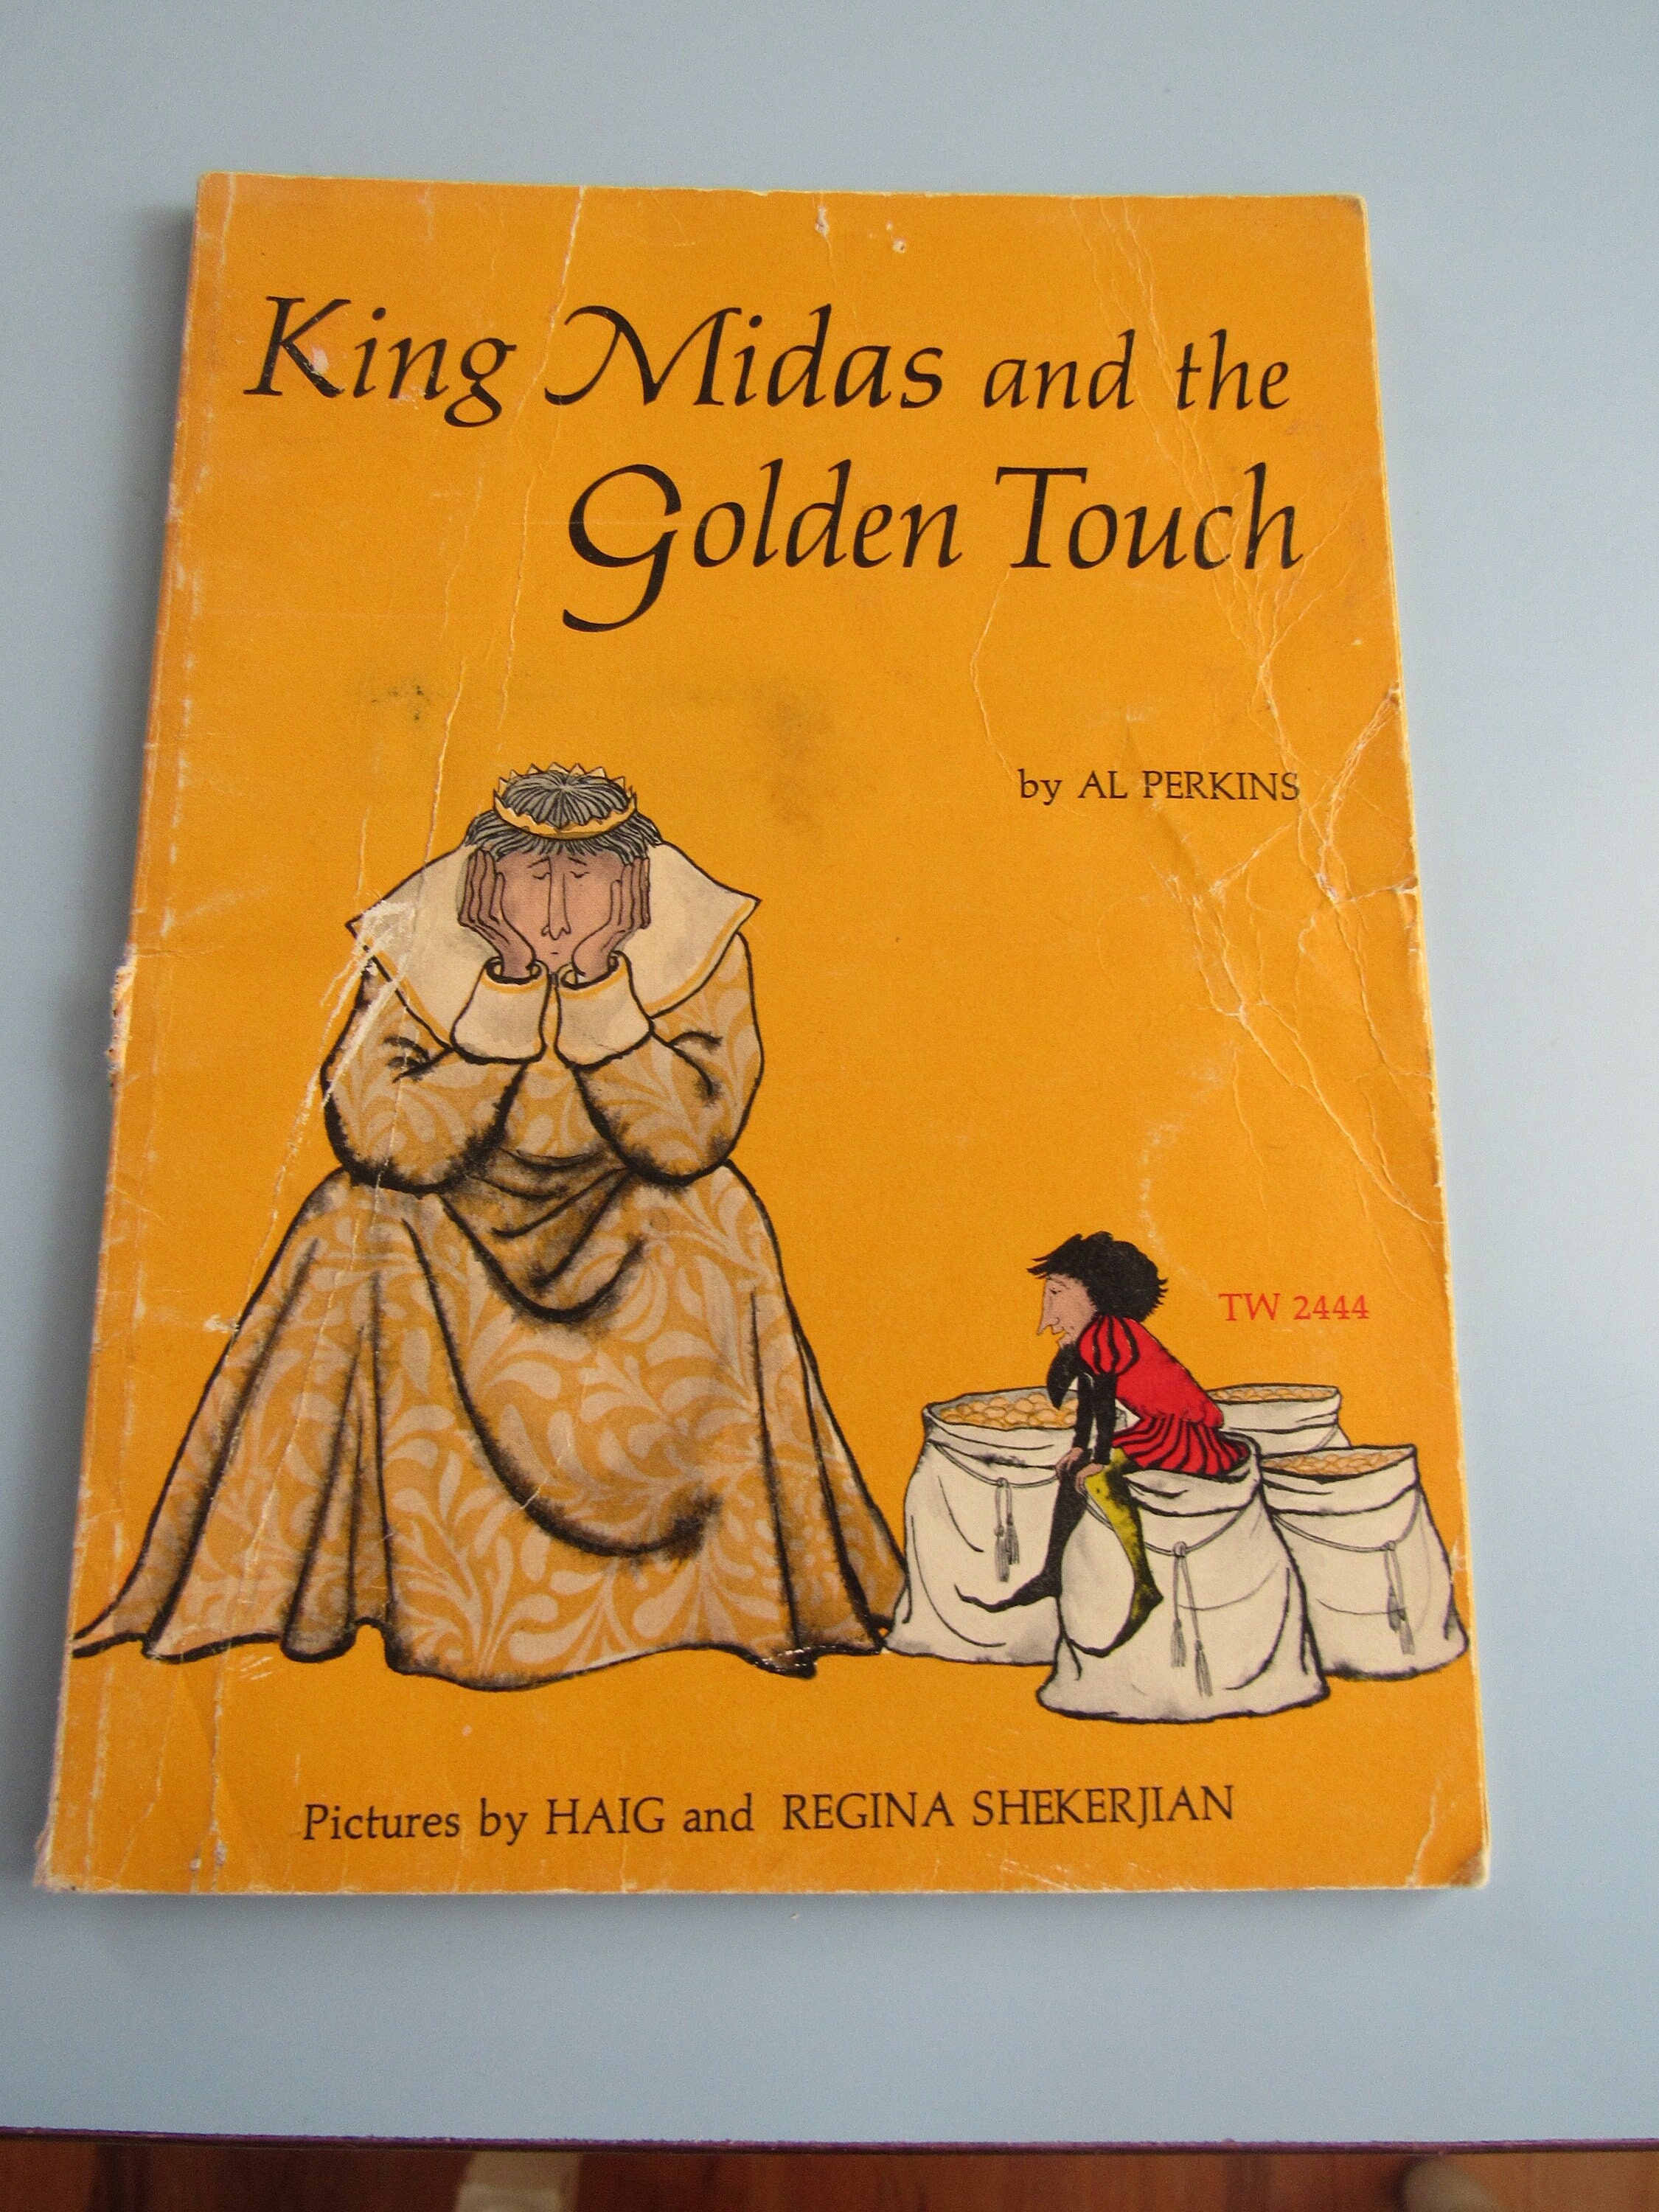 King Midas and the Golden Touch 33 1/3 Record 